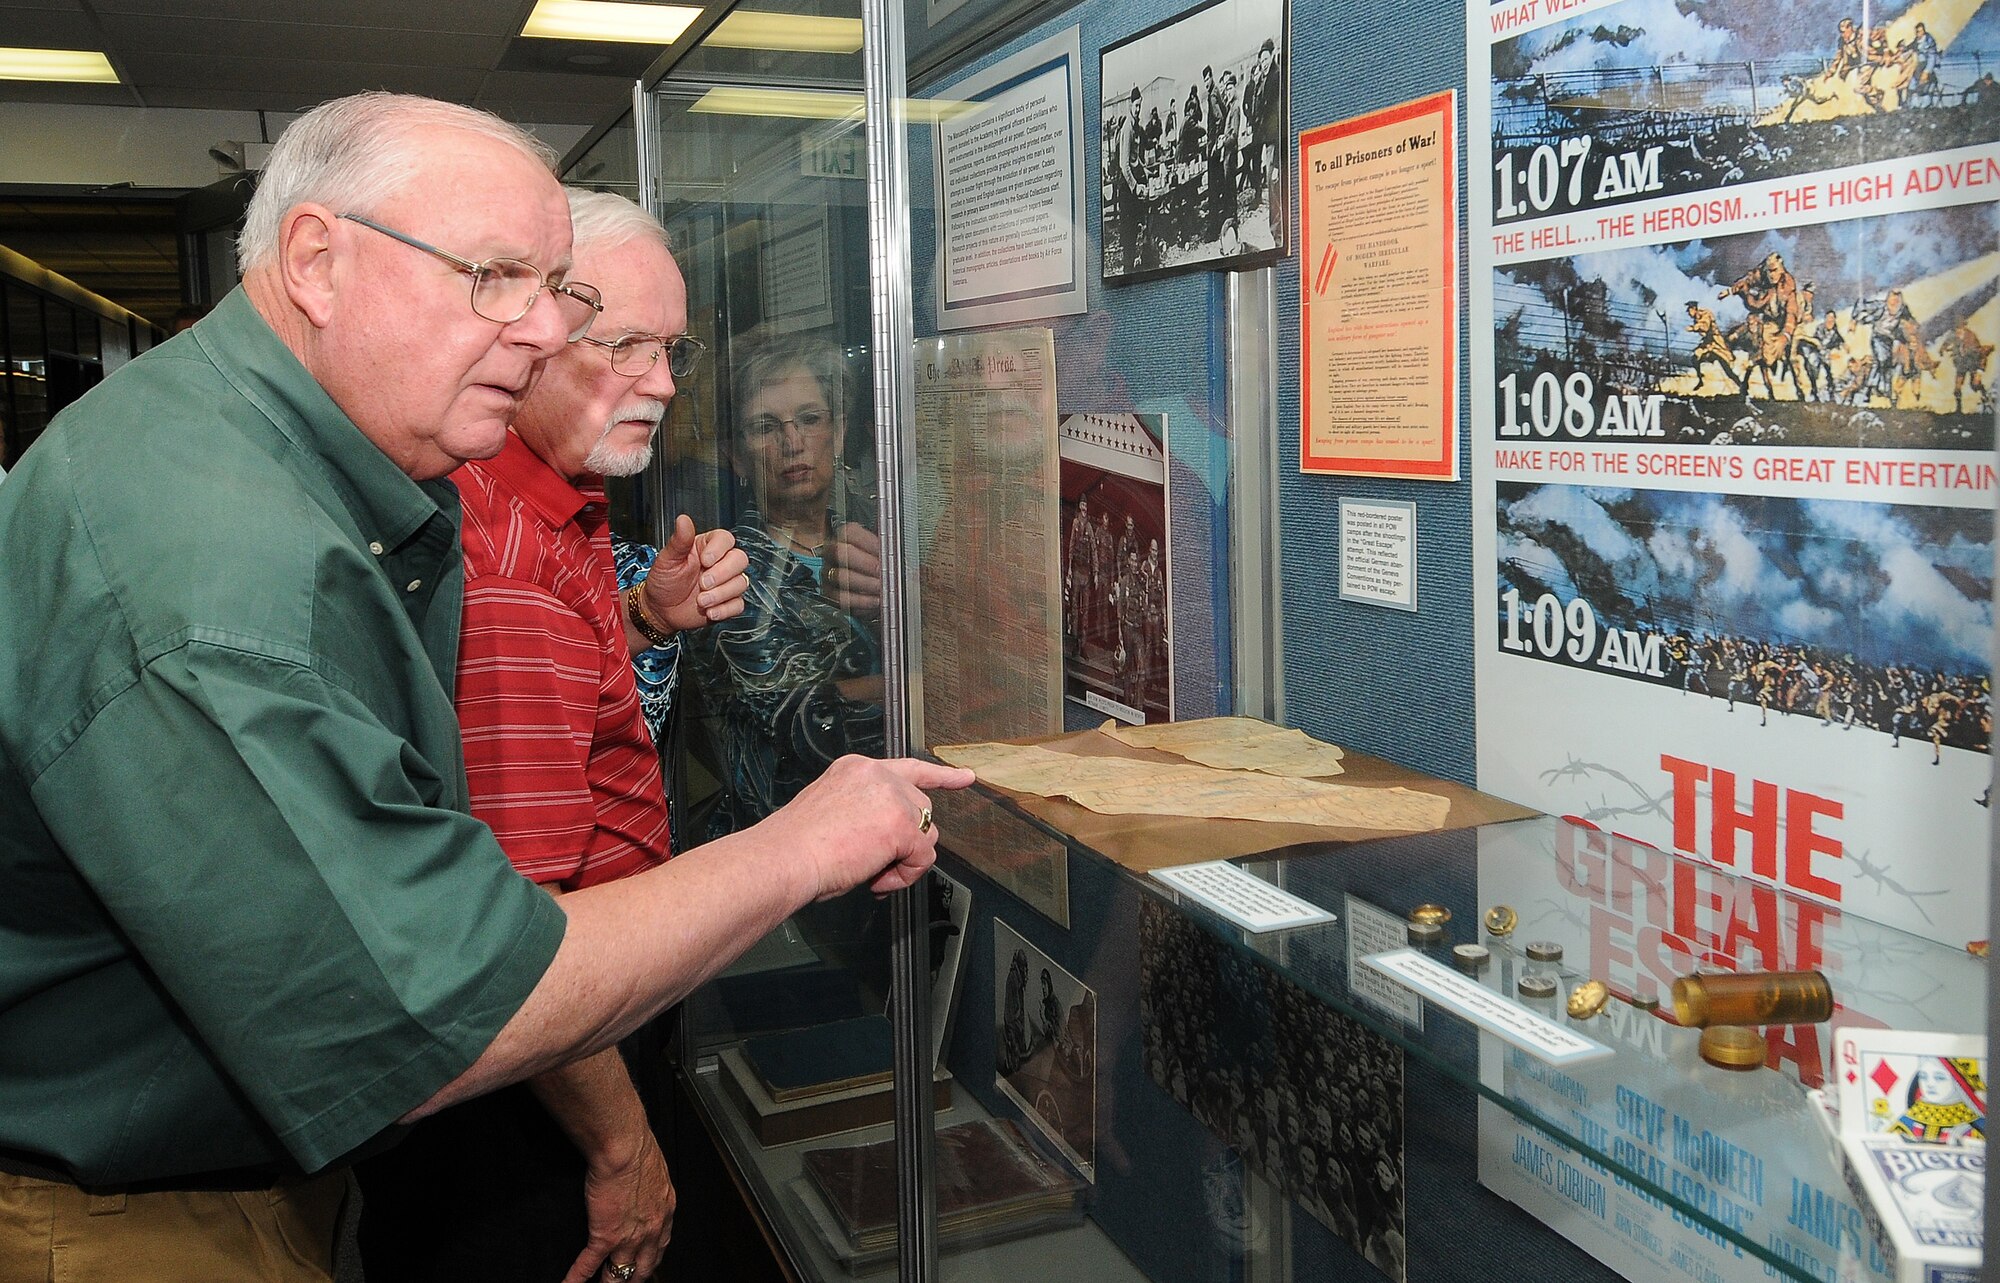 Jim Armature and James King look at a Stalag Luft III display outside the Gimbel room in the McDermott Library Aug. 20, 2010. The gentlemen were part of a group of about 60 people with the Royal Order of Jesters who visited the Academy. (U.S. Air Force photo/Rachel Boettcher)